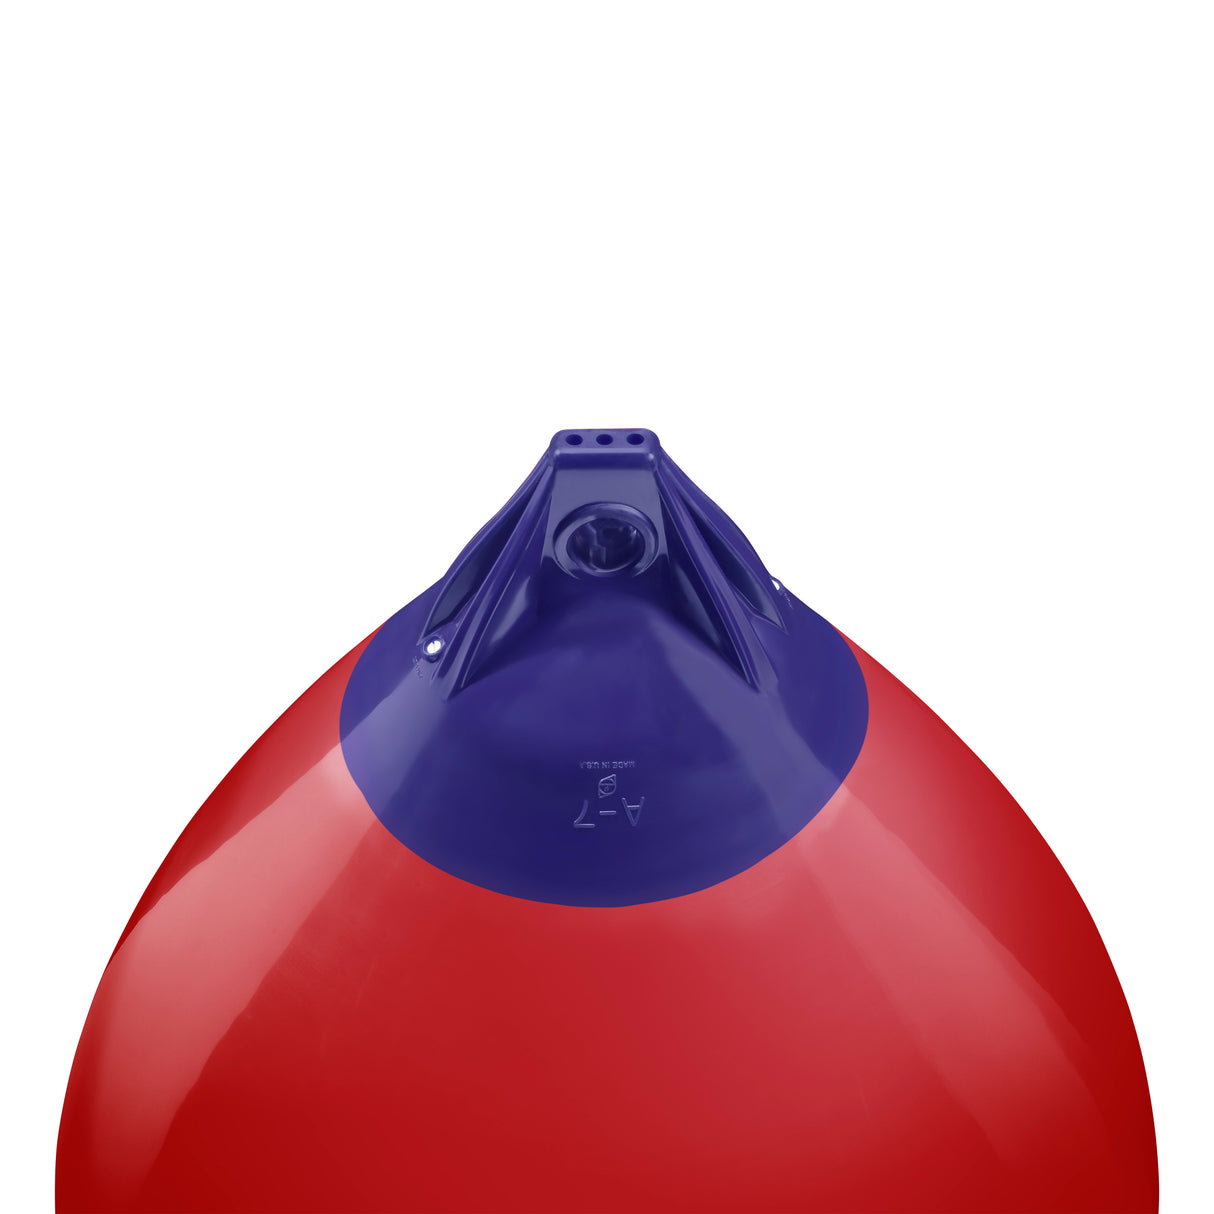 Classic Red inflatable buoy, Polyform A-7 angled shot